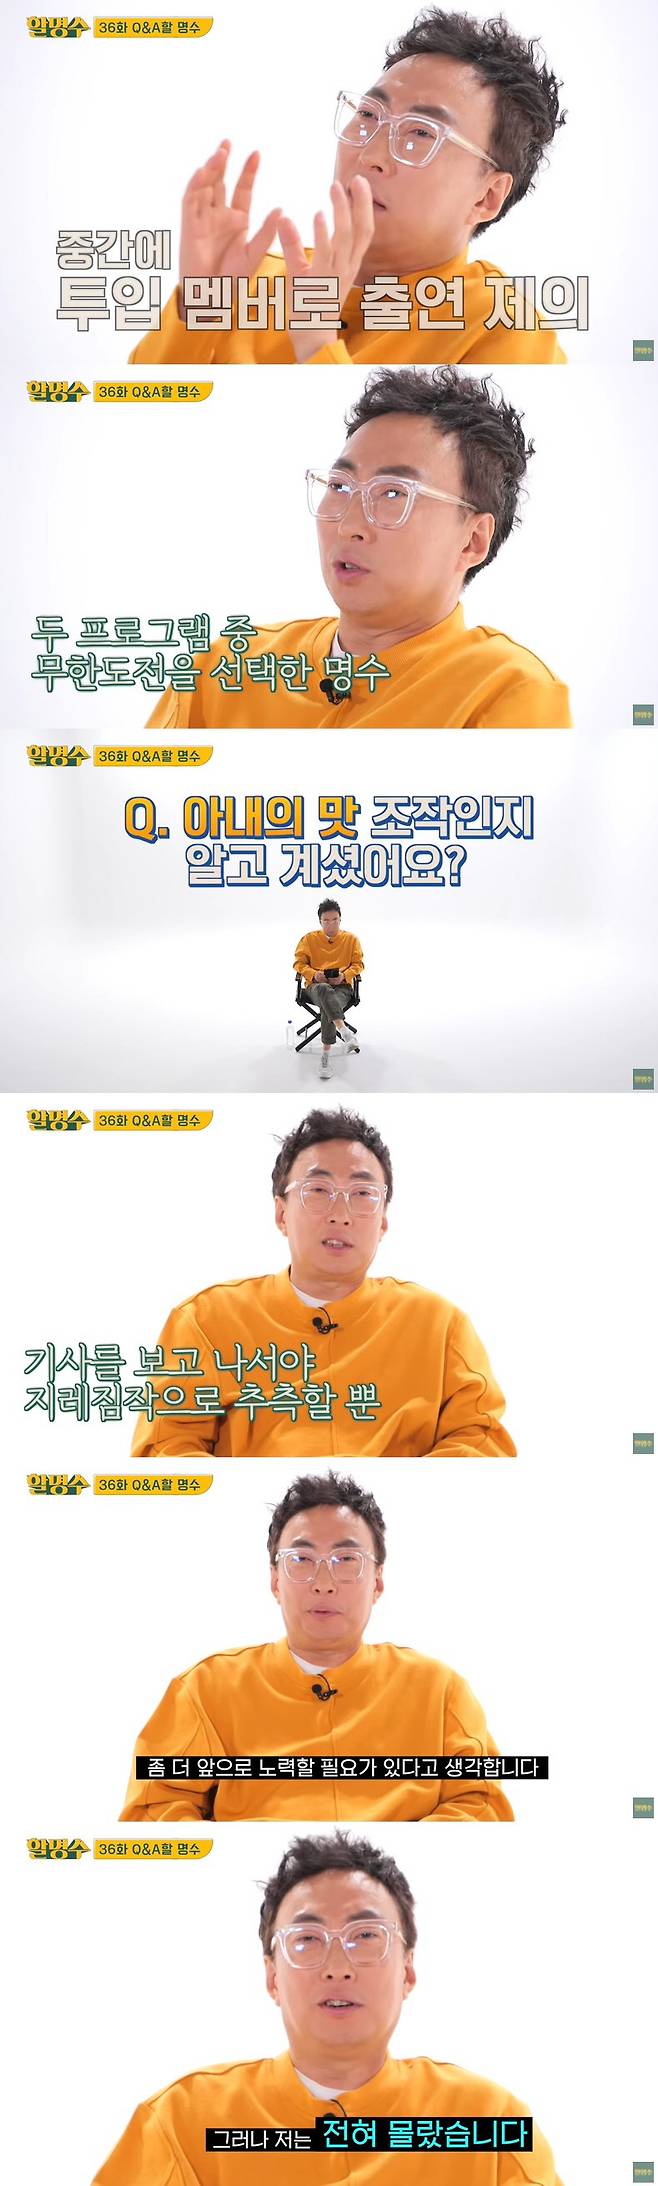 The wifes taste Falsify controversy? I didnt really know.On the 14th, YouTube channel Hwang Myung Soo posted a video titled Whatever you ask.Park Myeong-su had time to answer fans questions, praying for 500,000 subscribers.I did it for communication with young people, its not a reality to see a lot of YouTube rather than TV, Park Myeong-su said of the occasion of doing YouTube.But at first, she refused to appear on YouTube, which Park Myeong-su laughed at, saying the unit price is not right.Family people dont care about that, he said. Mr. Han Su-min said it would be easier than he thought. Its very cool. Theres no blood or tears.When asked if she subscribed to YouTube, her daughter Minseo said, I do not say I saw it, but I do not think I see it.I have to go home without seeing it. Minseo friends know that Minseos Father is Park Myeong-su. How not.Park Myeong-su said, I do not know if my face looks like it.Park Myeong-su also mentioned property Park Myeong-su said, I think I have a lot of property because I am a booty, but I do not.I will not go out, so I will change used cars once a month every three years. The latest contacts were Jeong Jun-ha and Sayuri.Park Myeong-su said, Mr. Sayuris child was so beautiful that I sent a letter. Jeong Jun-ha asked me, but I did not listen.Asked by the staff, So youre not pissed off, Park Myeong-su said, I like to carry a baby toy; I cant even get angry when I carry a camera.You can laugh and meet like that, he said.Yoo Jae-Suk and 3 nights and 4 days silence Jeong Jun-ha and 3 nights and 4 days drinking trip also cited Jin-ha.Park Myeong-su boasted of his friendship with Jeong Jun-ha, saying, Jeong Jun-ha and drinking are much more fun; Jun-ha drinks well and takes care of me.Park Myeong-su cited Running Man as a sad program, let alone appearances.Park Myeong-su said, I had an opportunity to put in Running Man, but it seems that the directors were burdened with Infinite Challenge and Running Man at that time.So I only got to the Infinite Challenge, but it was a longevity program. I did it to run the Running Man Park Myeong-su, who is widely regarded as softer than the Infinite Challenge, which was irritating.The house is a little stable, so I used to have troubles with each other while raising a child, but now I do not get irritated outside, Park Myeong-su said.I also honestly answered the question about wifes taste which ended the season due to the controversy of the Falsify of the couple.Park Myeong-su asked, Did you know Falsify? Do you honestly say it? If you go out, you do your best.I thought it was when it happened. I apologize politely if there is anything wrong and I think I need to try harder in the future. But I did not really know. 